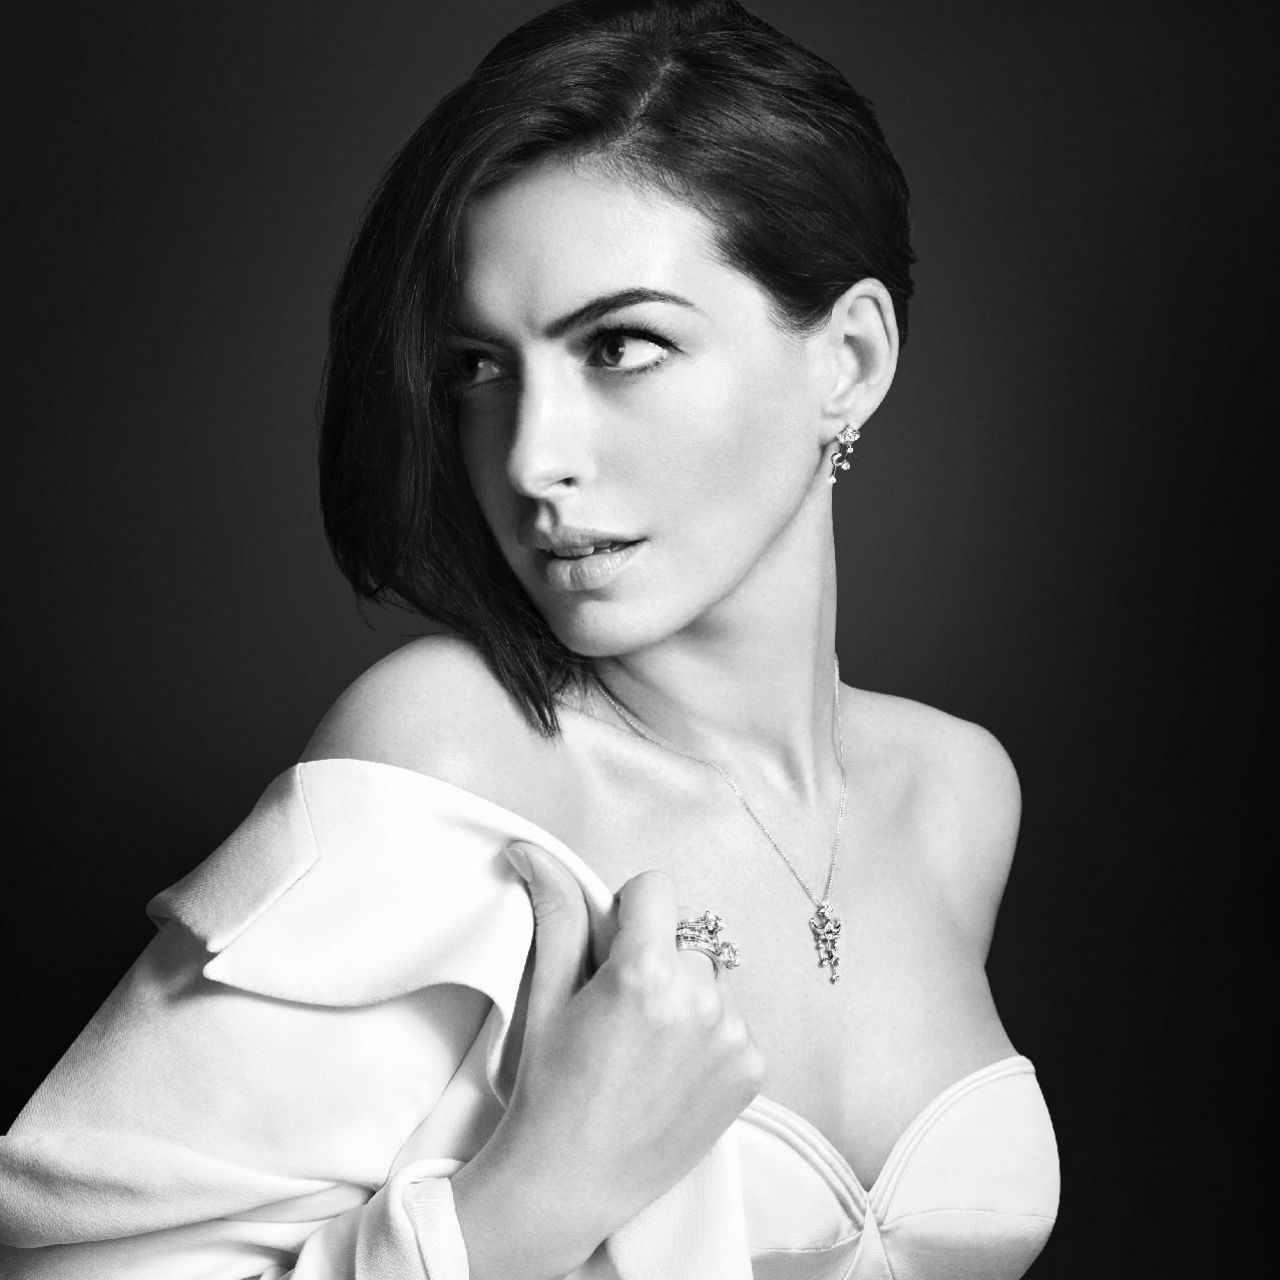 Anne Hathaway Photo Shoot for Keer, 2016